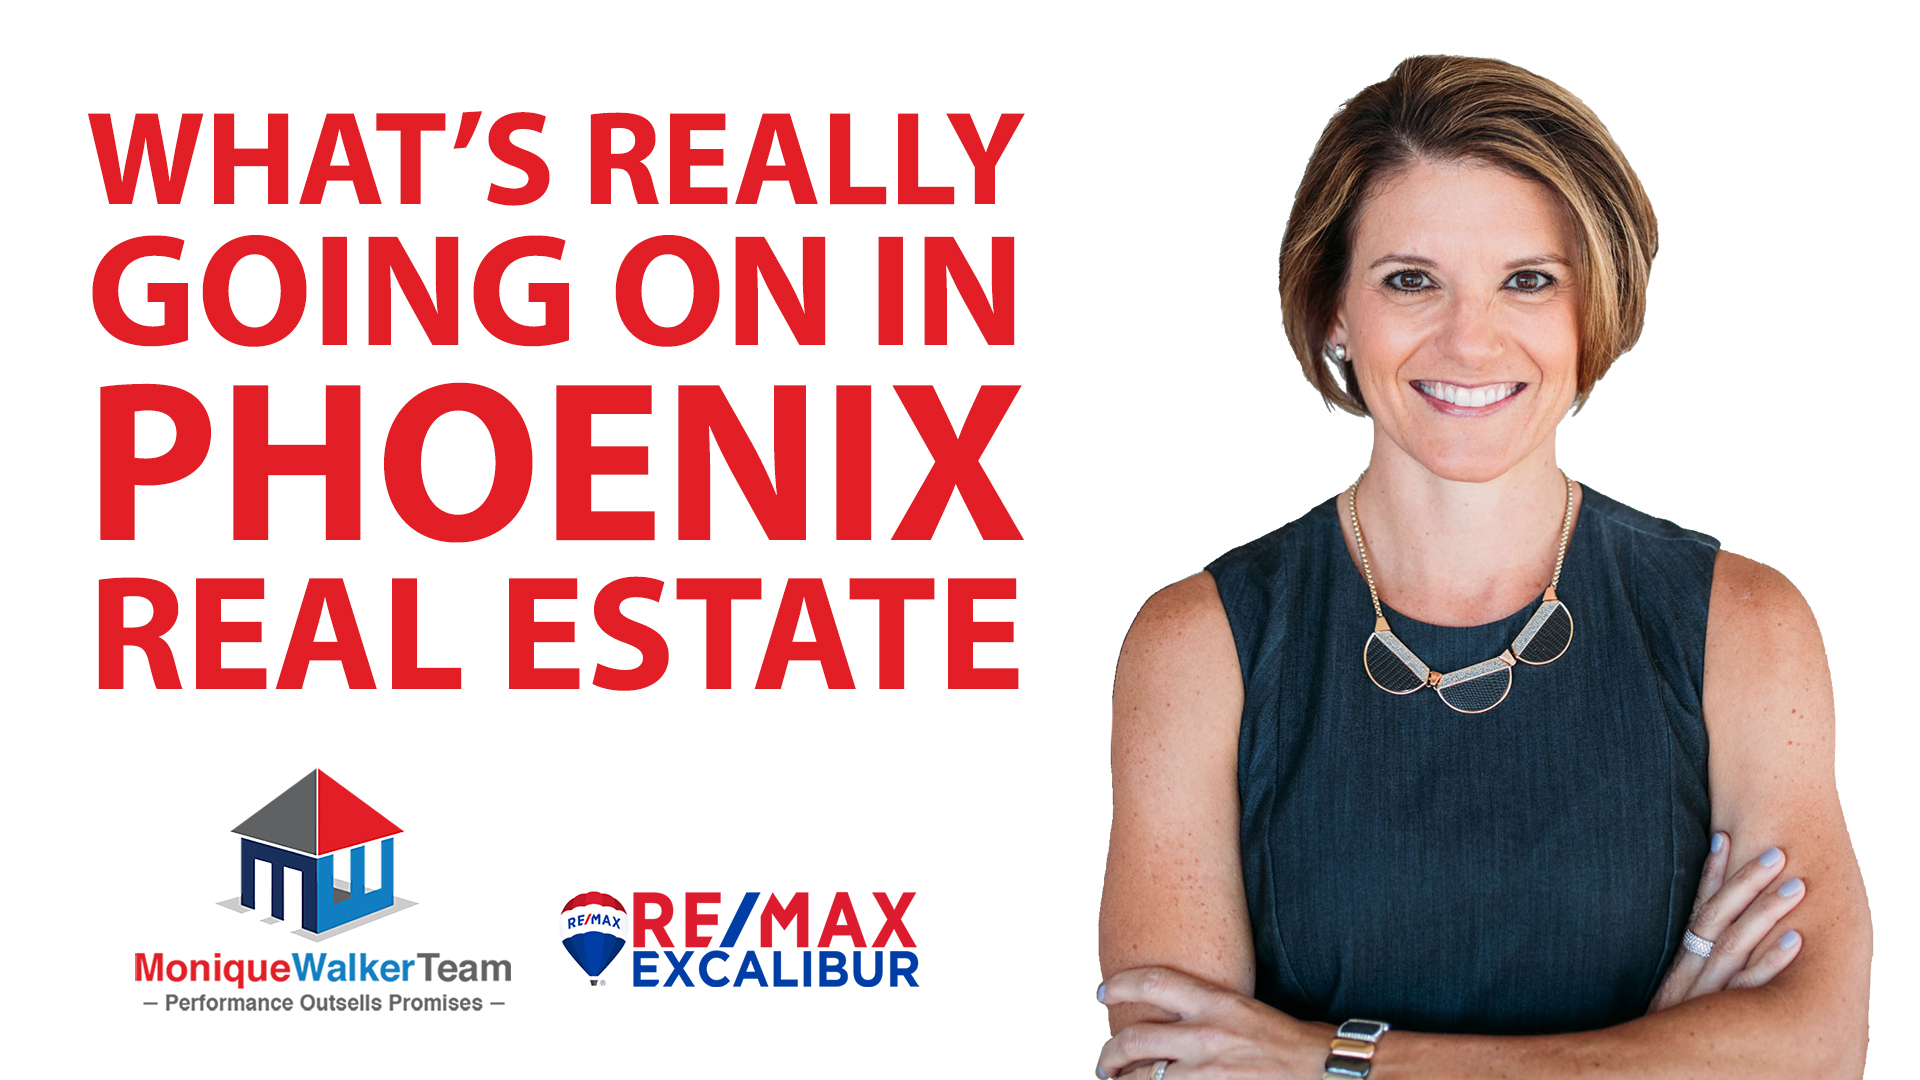 An Update on the Phoenix Real Estate Market